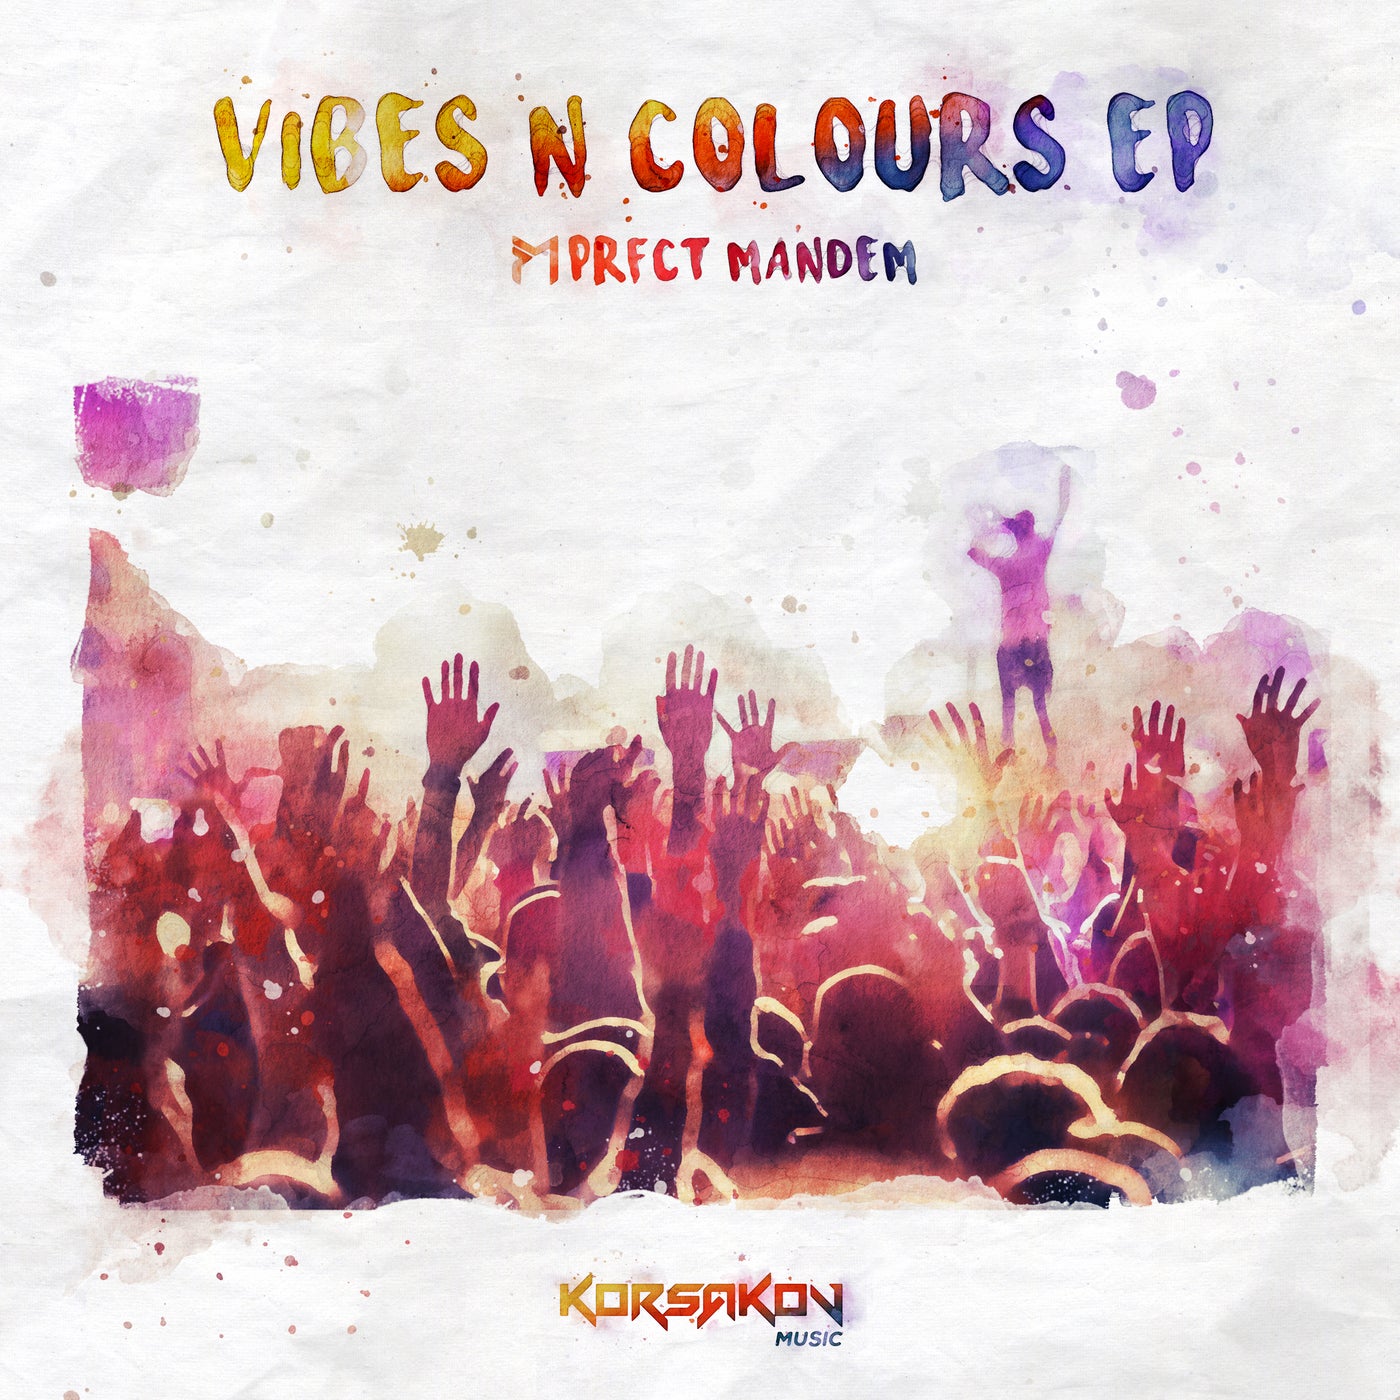 Vibes n Colours EP